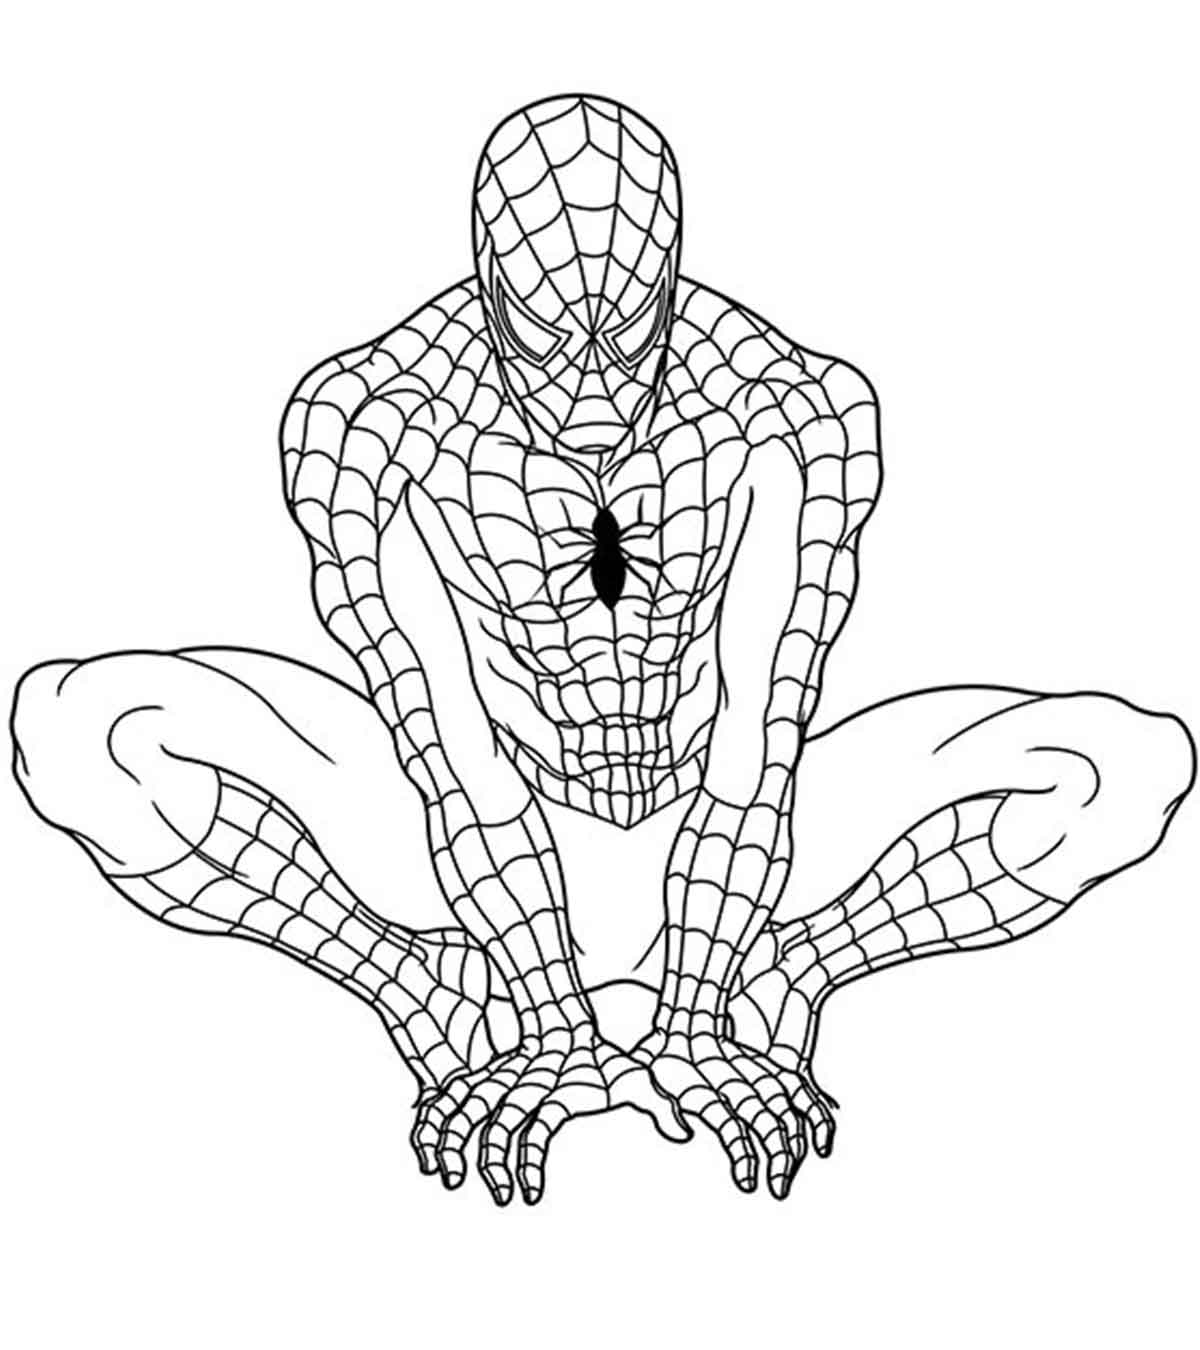 coloring-pages-top-20-superhero-coloring-pages-for-your-little-ones